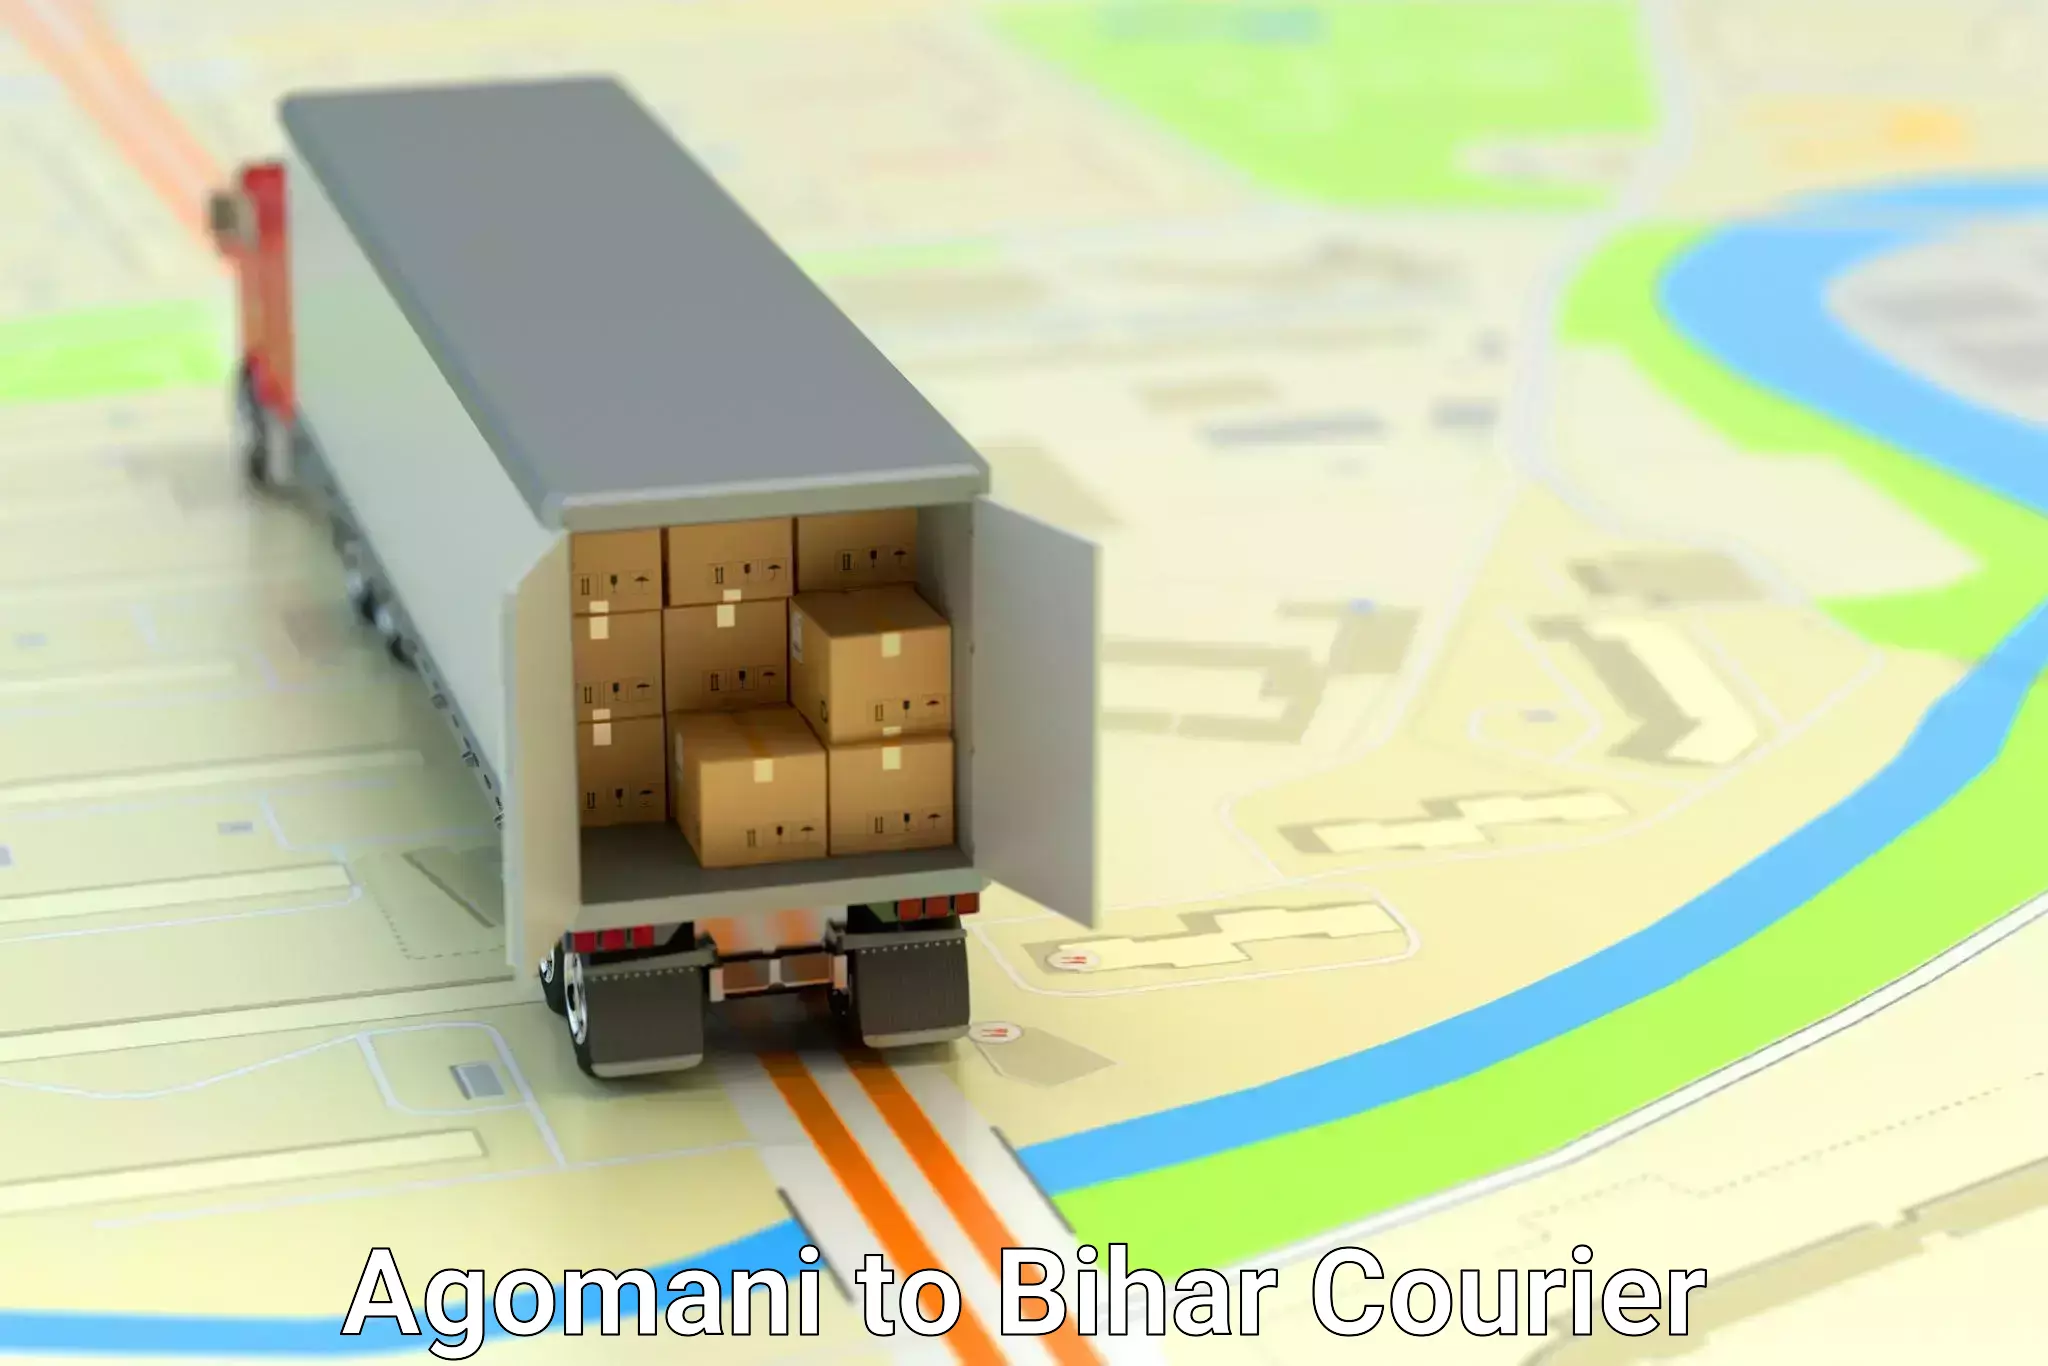 Scheduled delivery in Agomani to Bihar